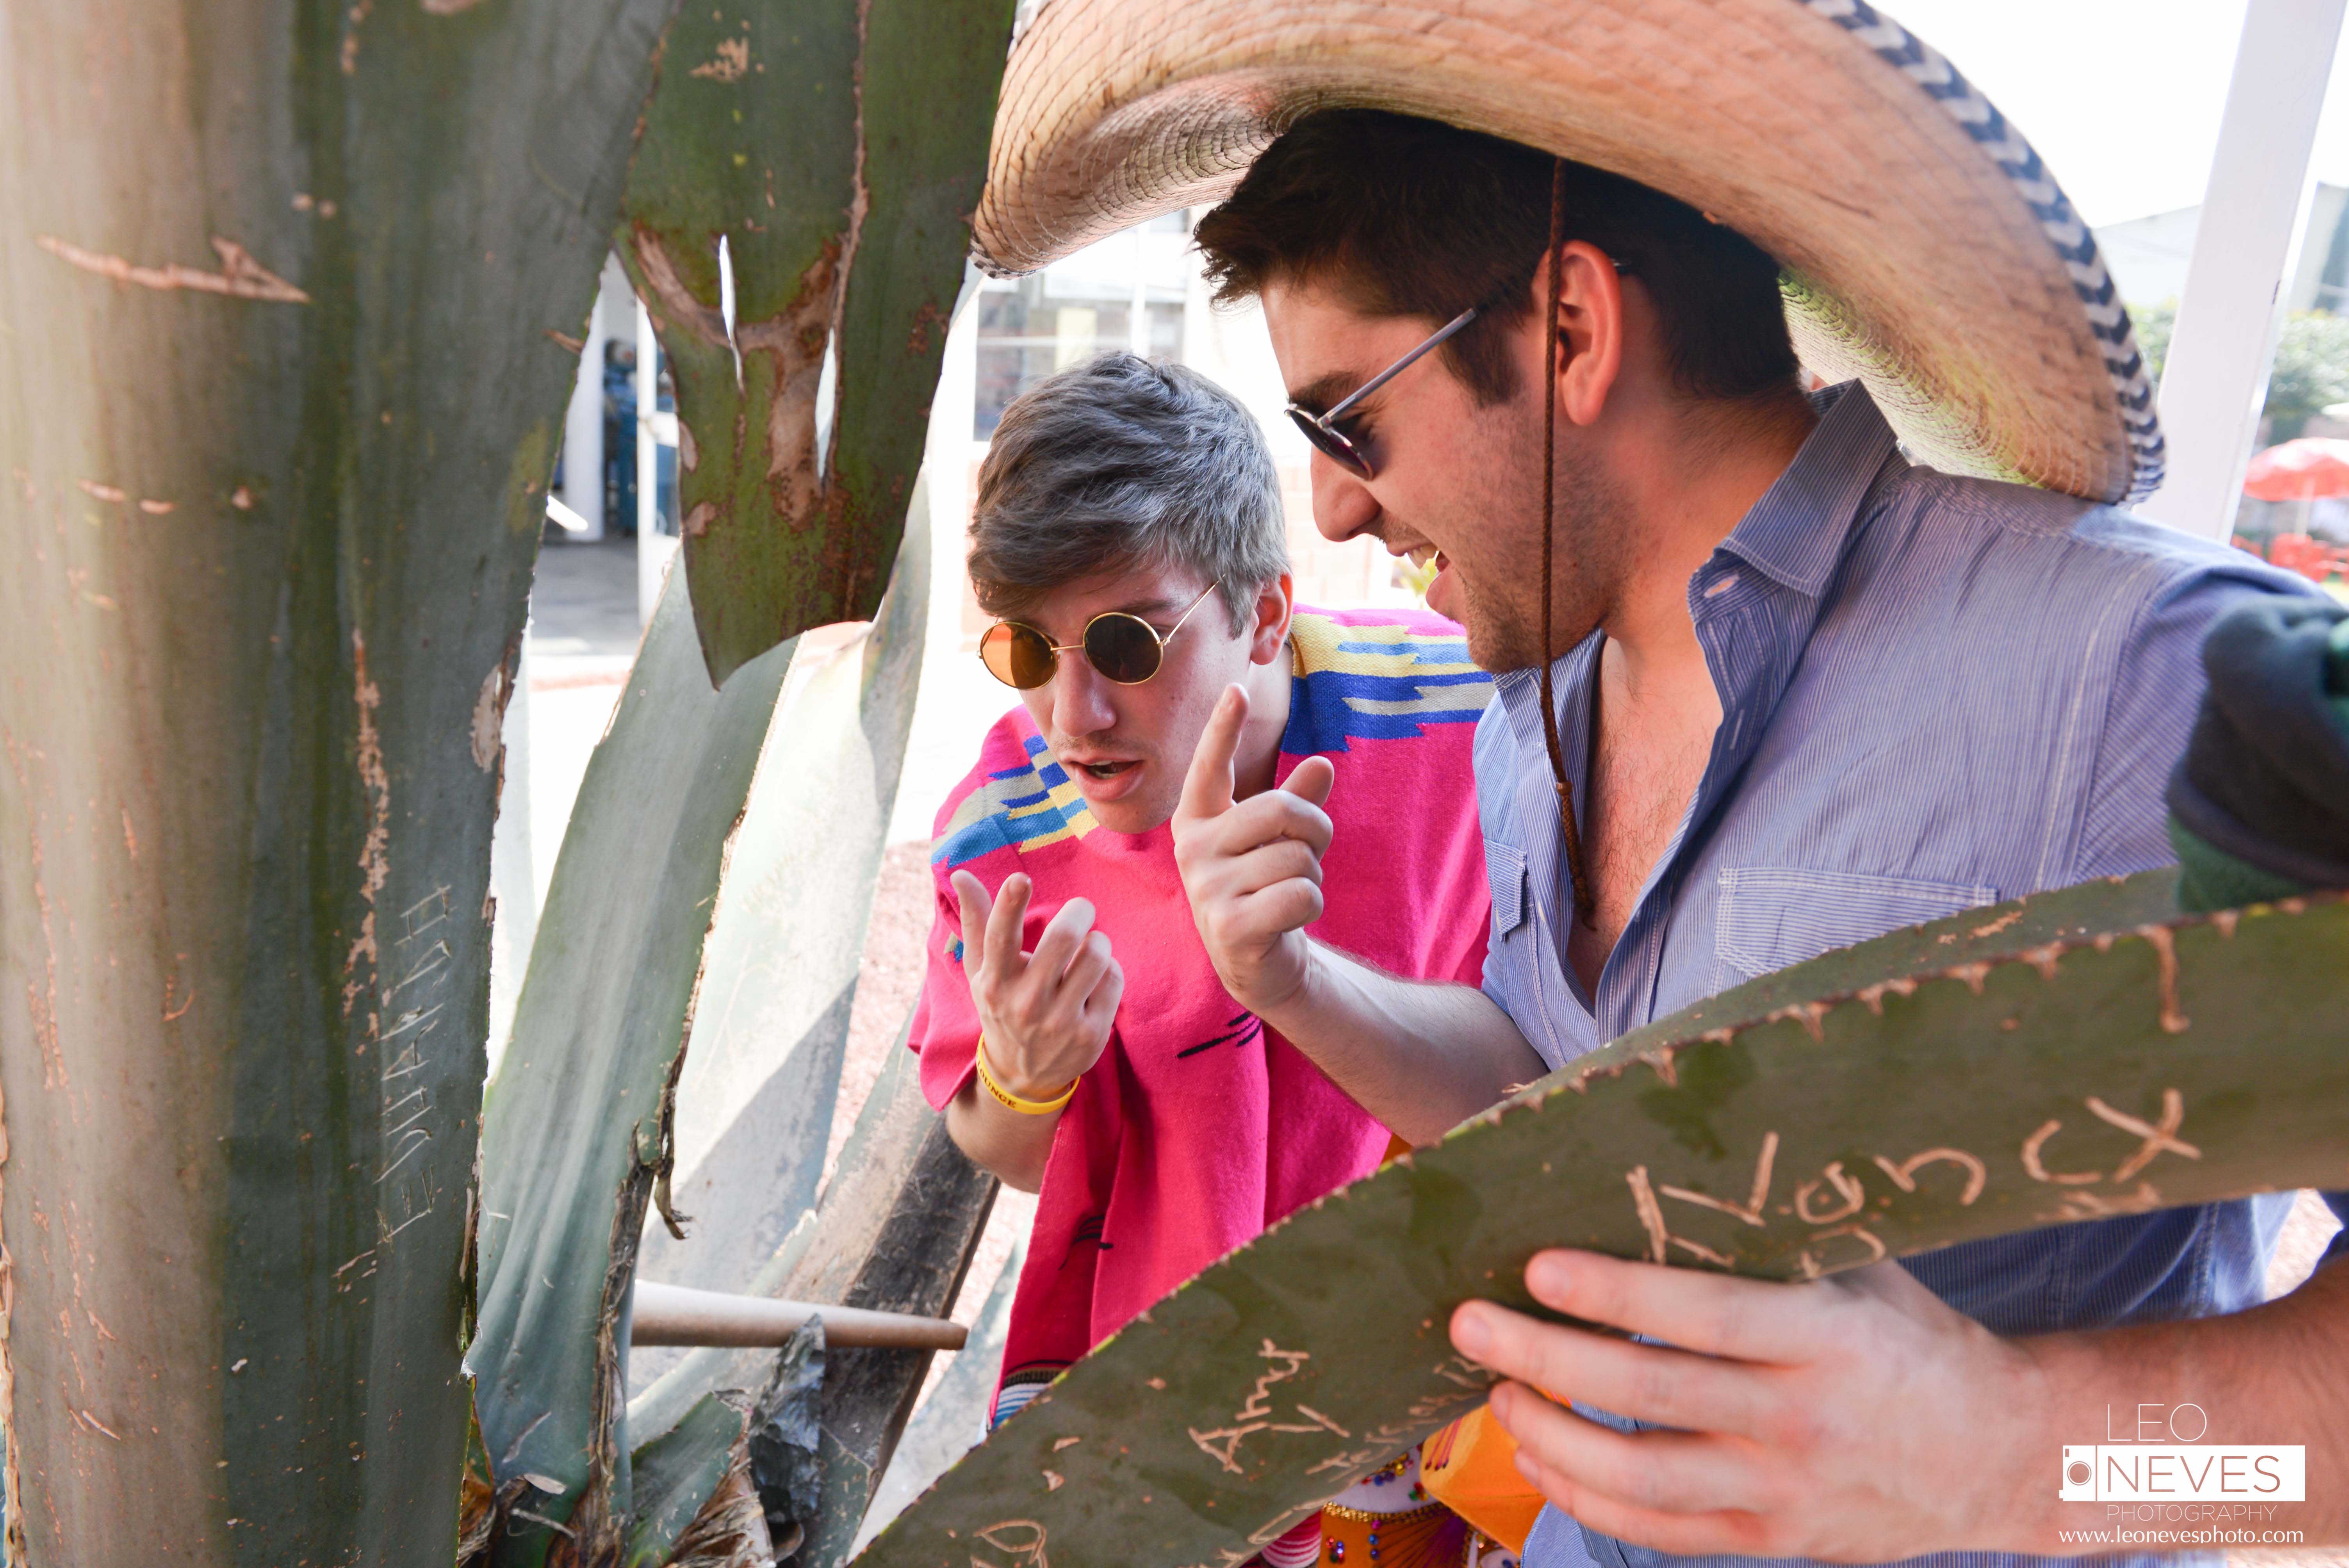 The fermented juice from the agave plant turns into Pulque, which is one of the world's earliest forms of liquor and an aphrodisiac!